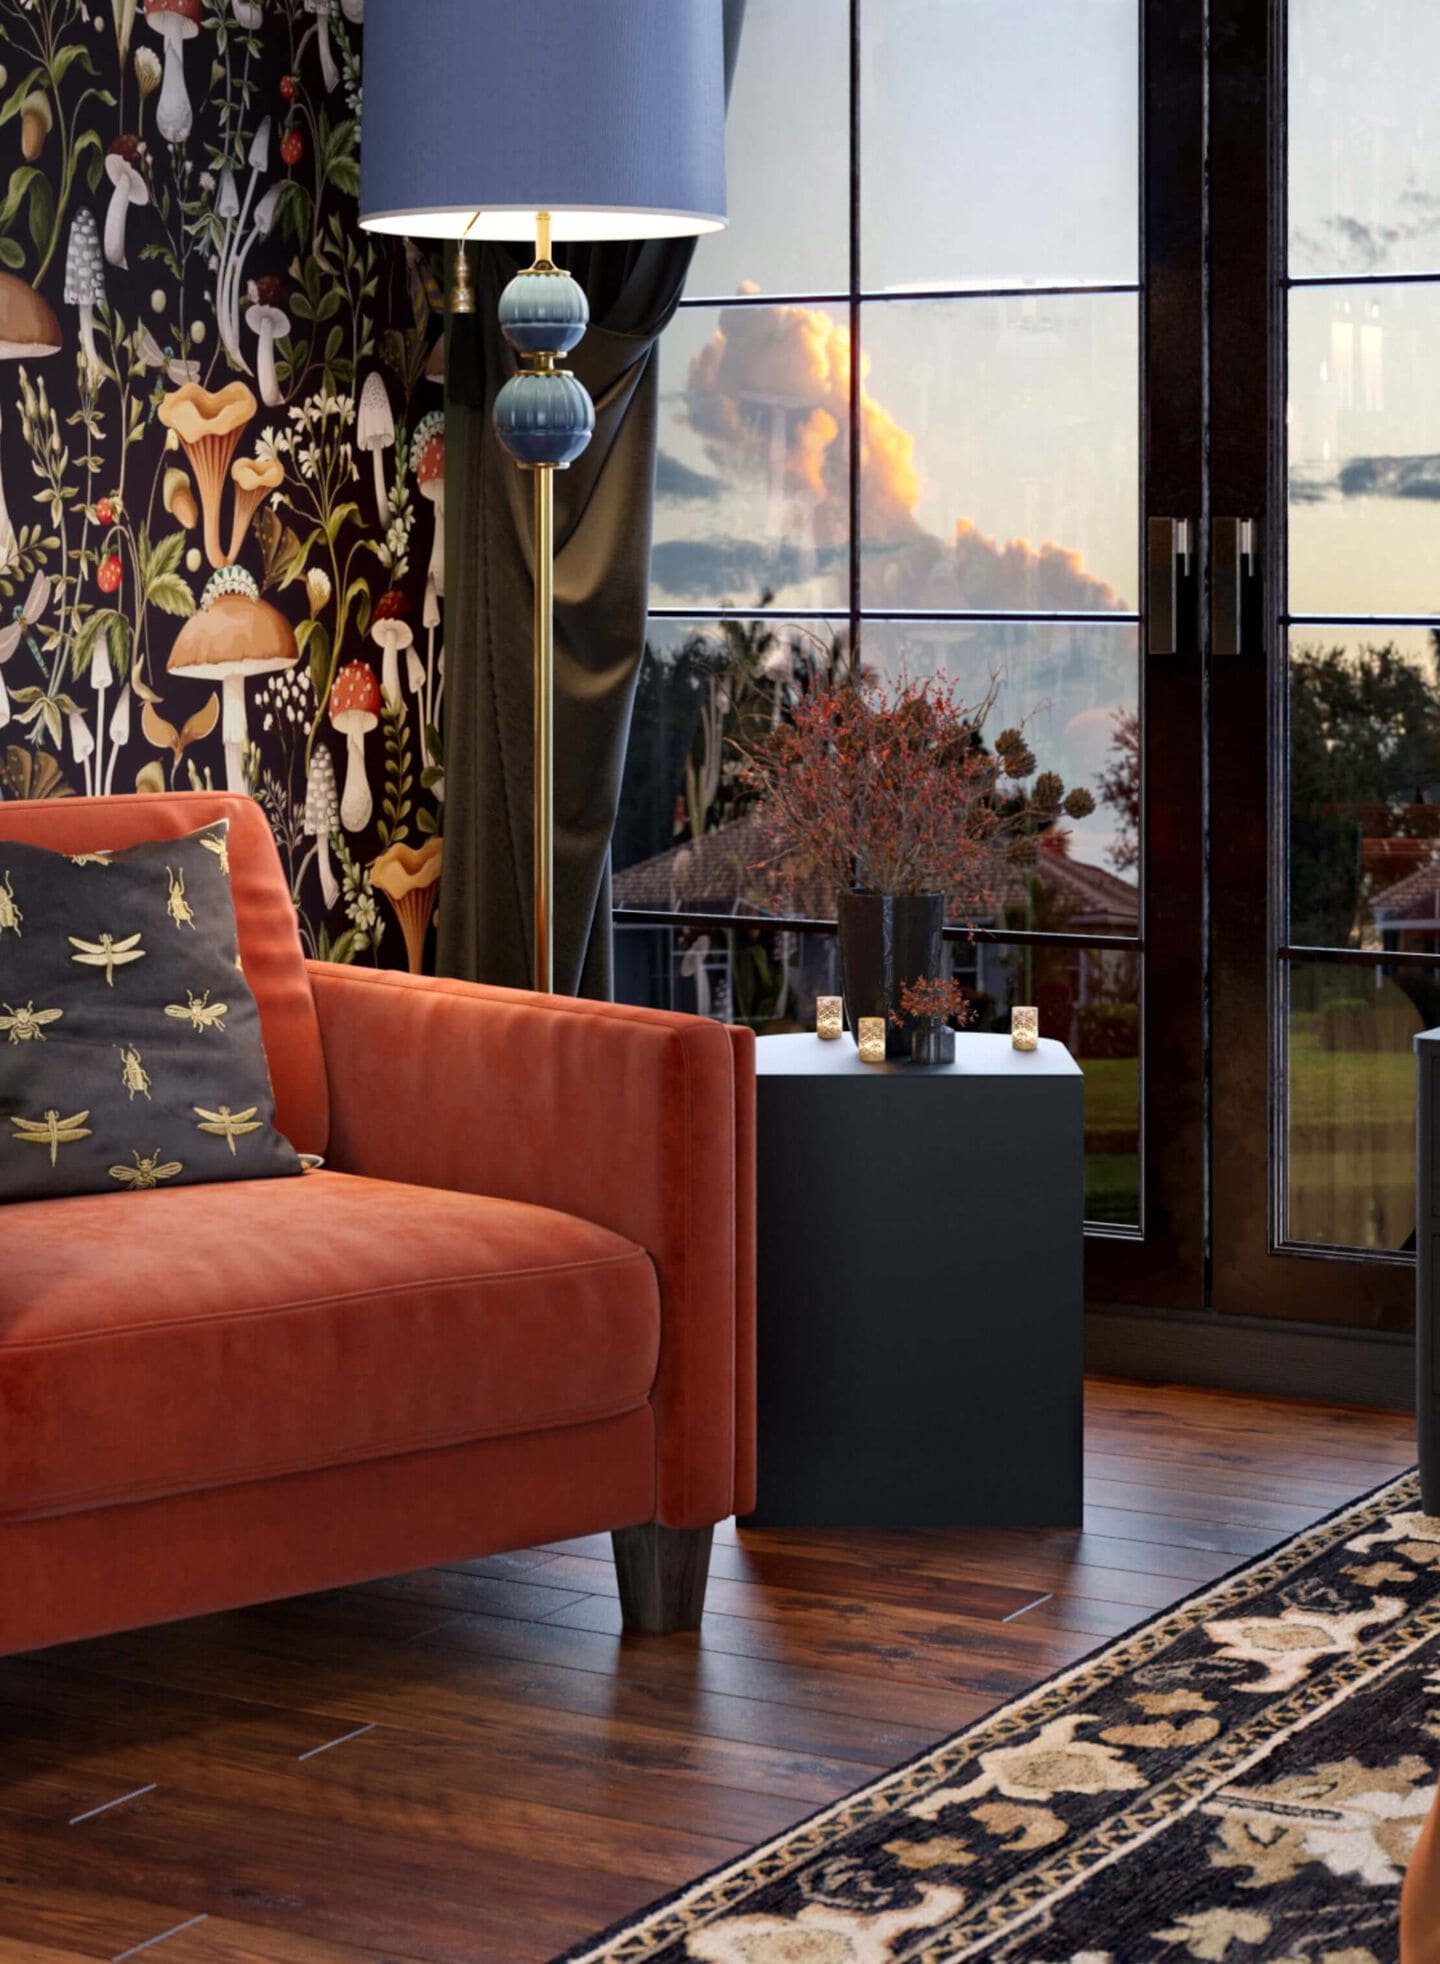 A living room with burnt orange chair, blue tall lamp, rug, dark wallpaper and a big window.